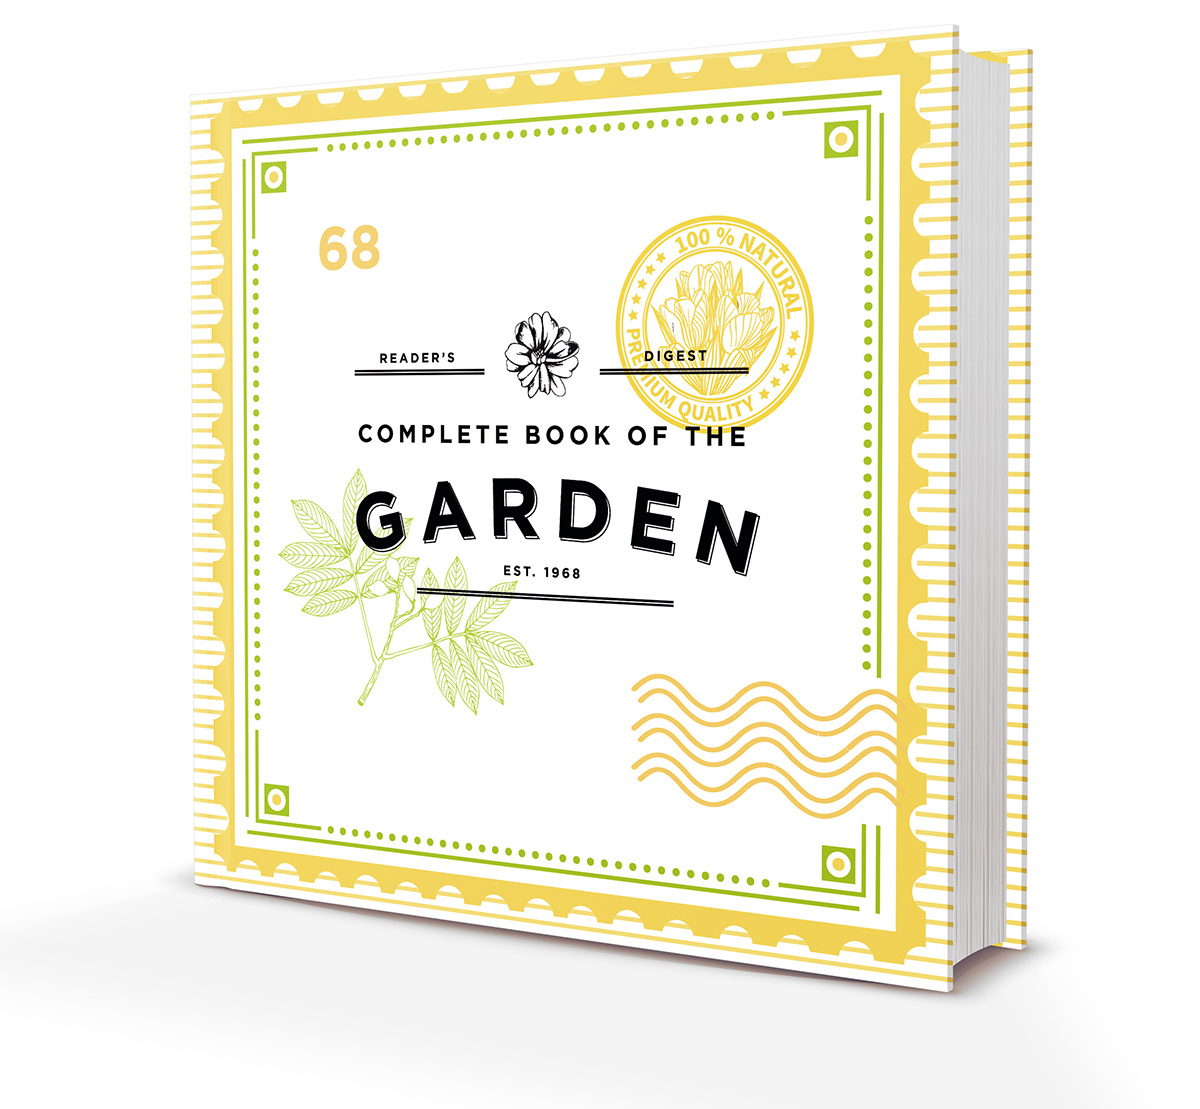 book redesign patrick dooley readers digest garden complete book of plants Flowers vintage Illustrative yellow and green postage stamps how-to guides book publication